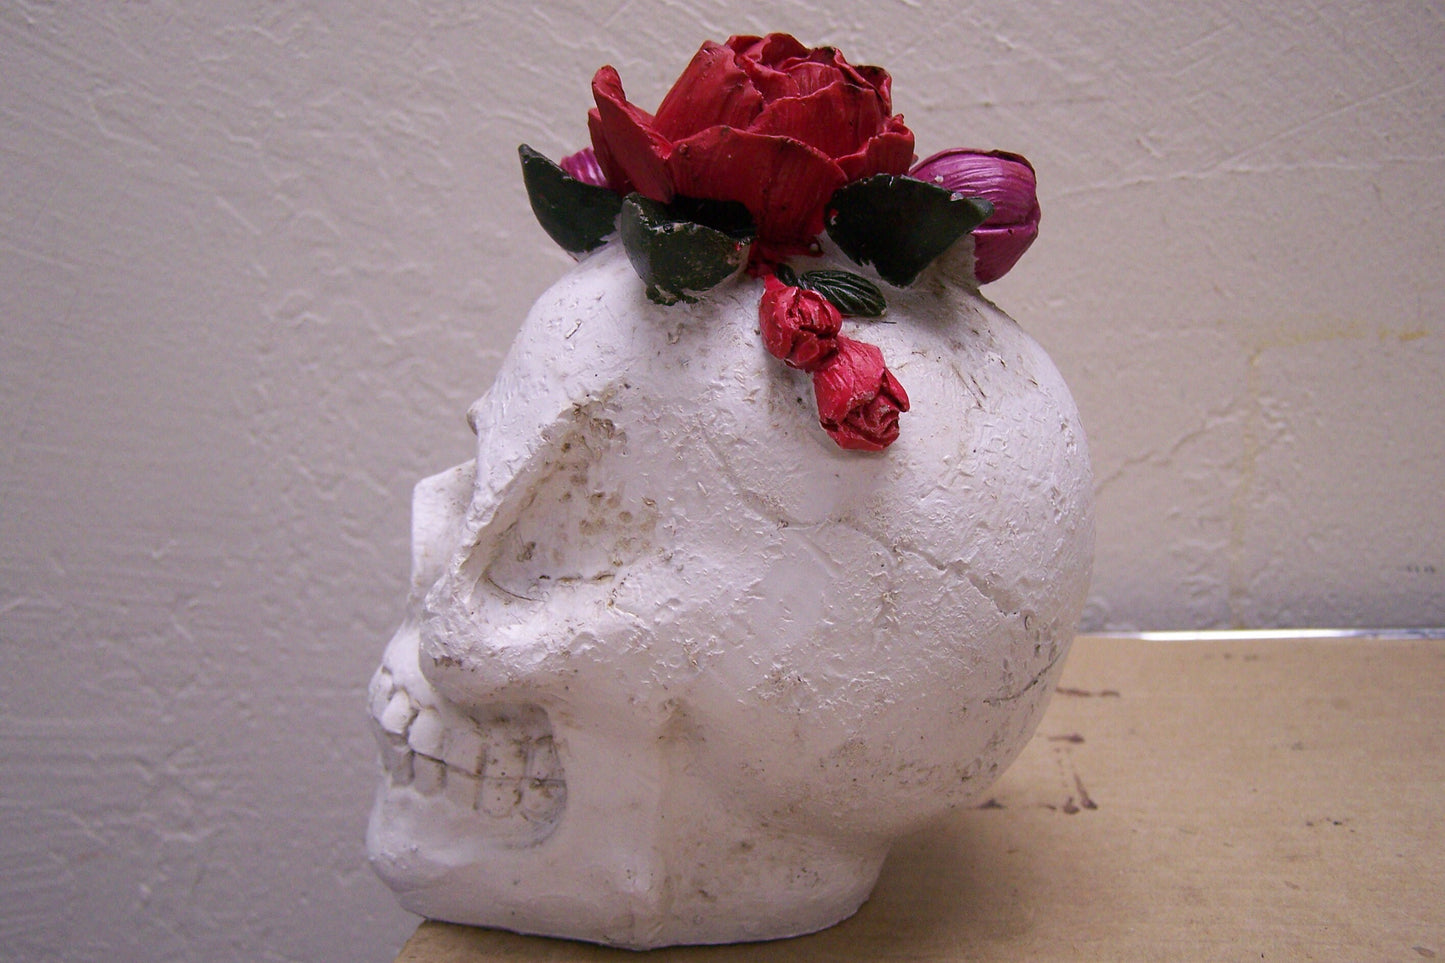 Painted Resin Day of the Dead Skull with Roses - Mexico